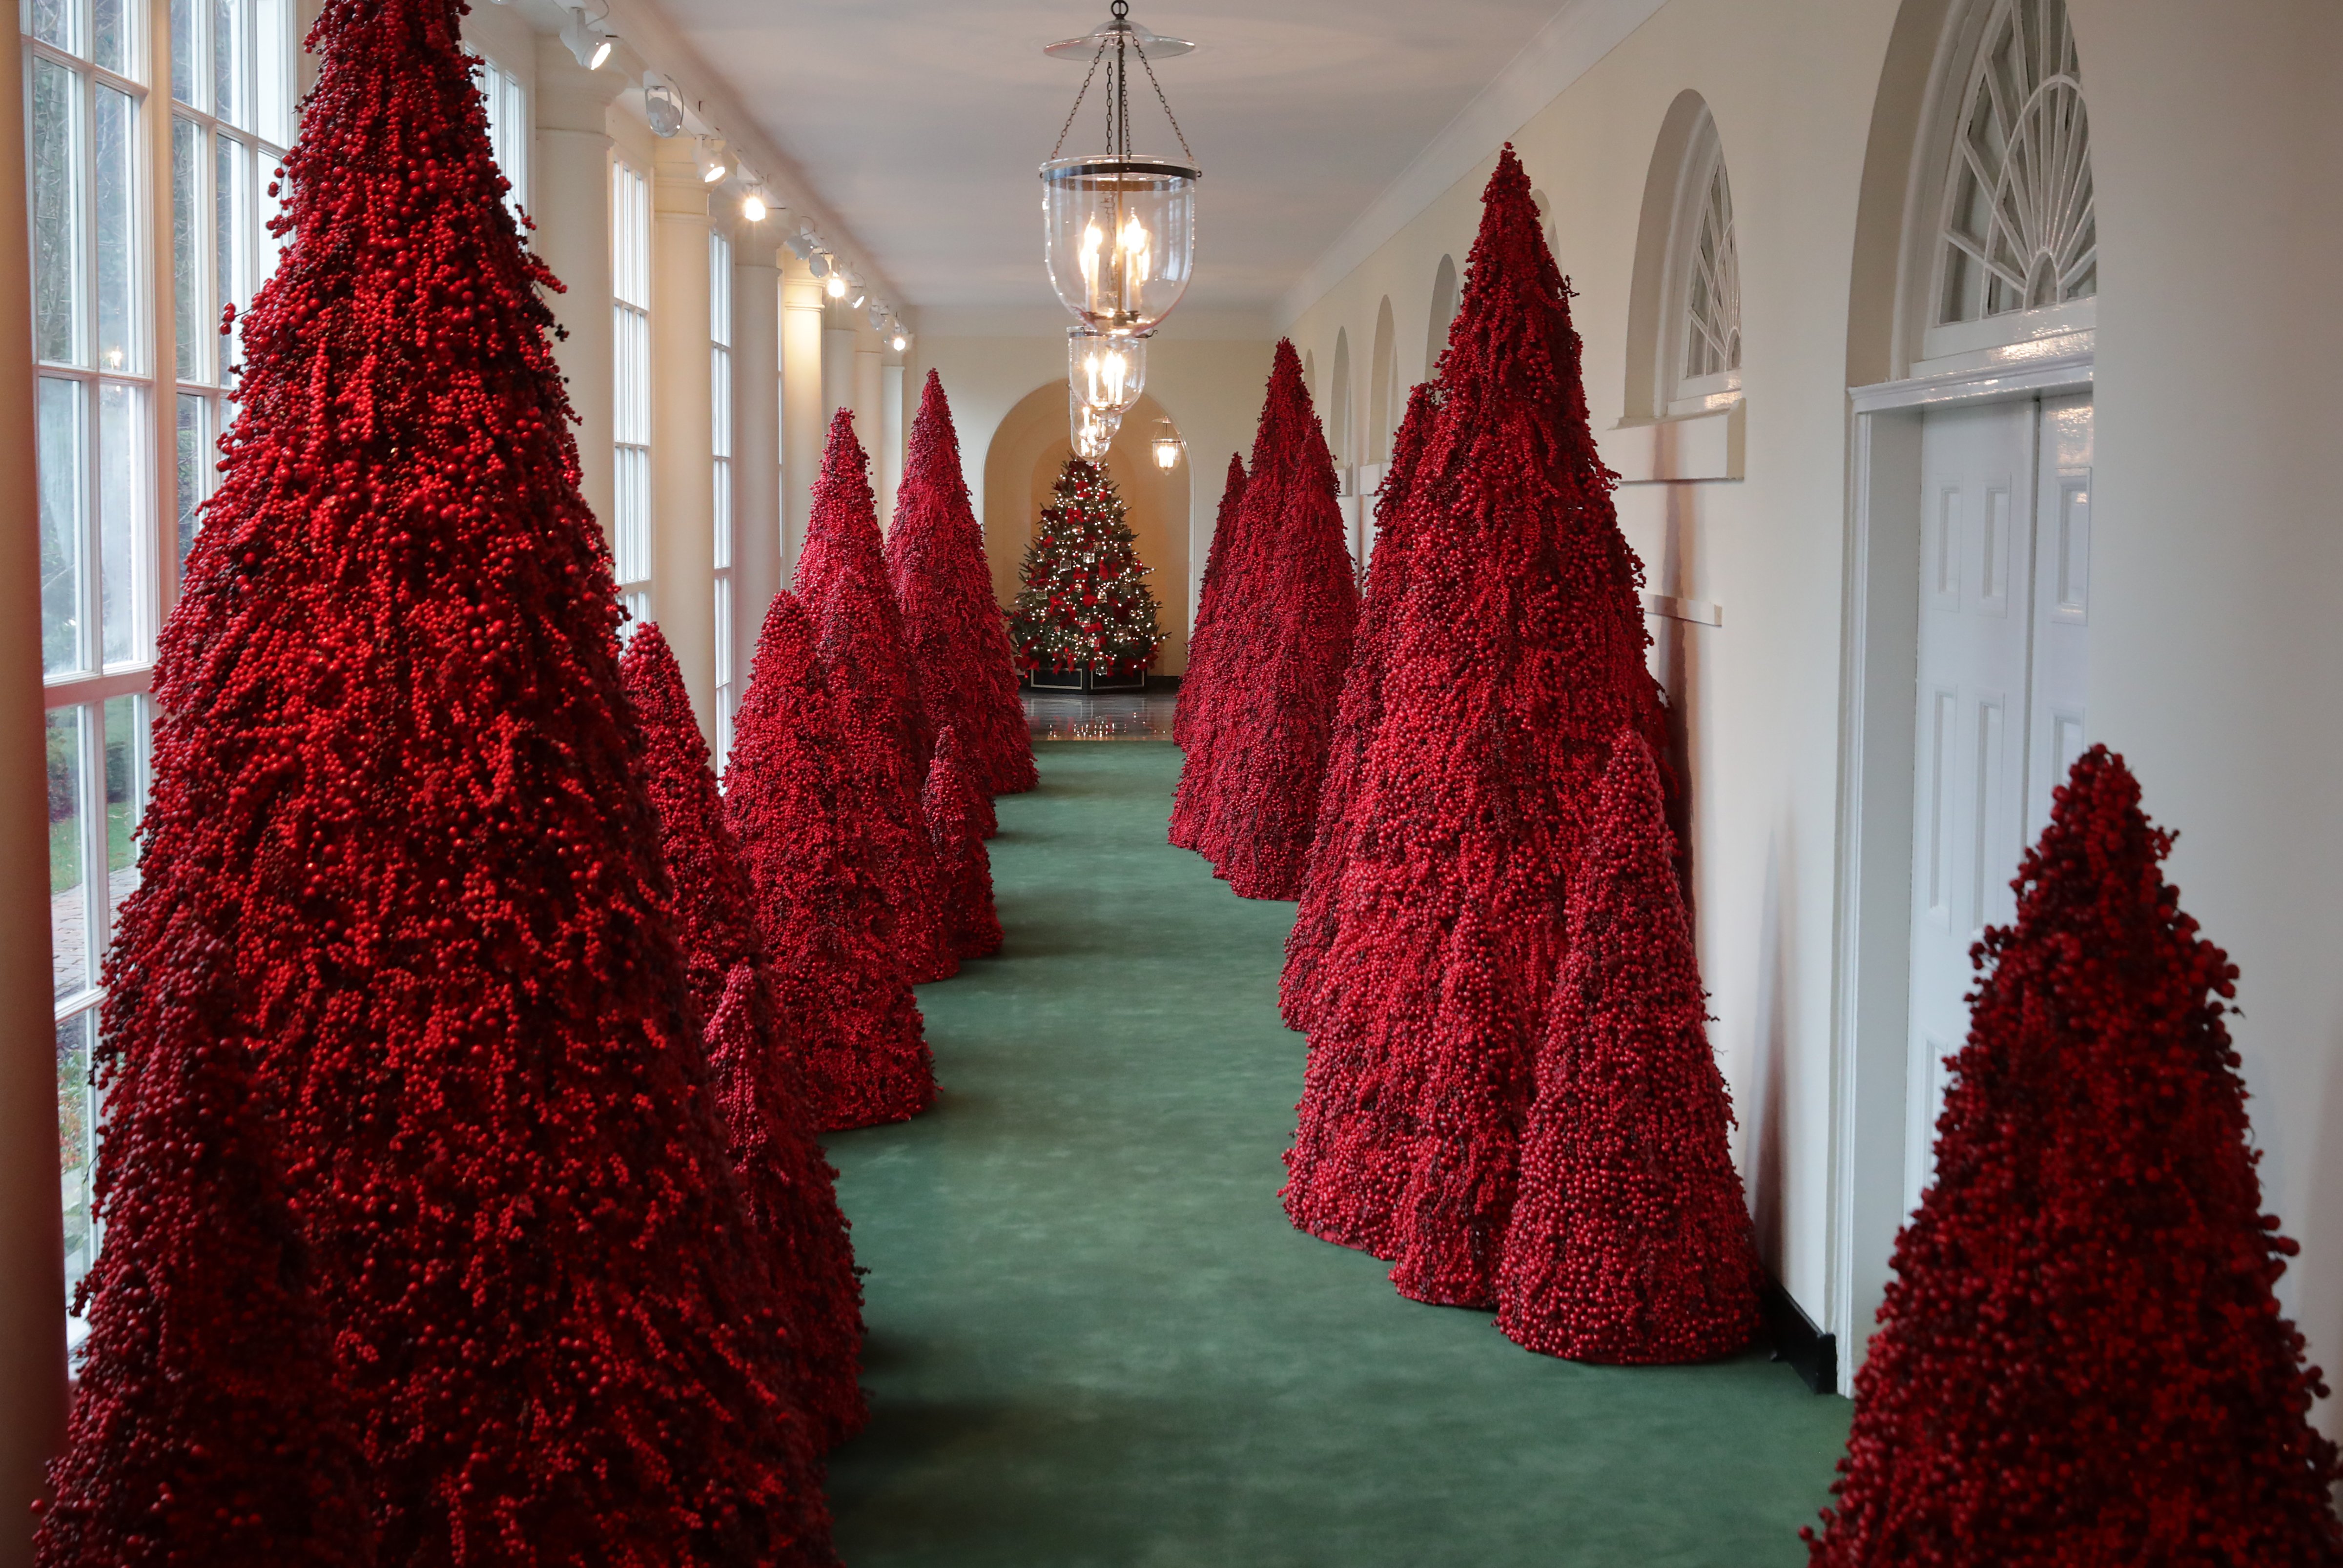 More than 40 red topiary trees line the East colonnade as part of the holiday decorations at the White House. (Chip Somodevilla—Getty Images)